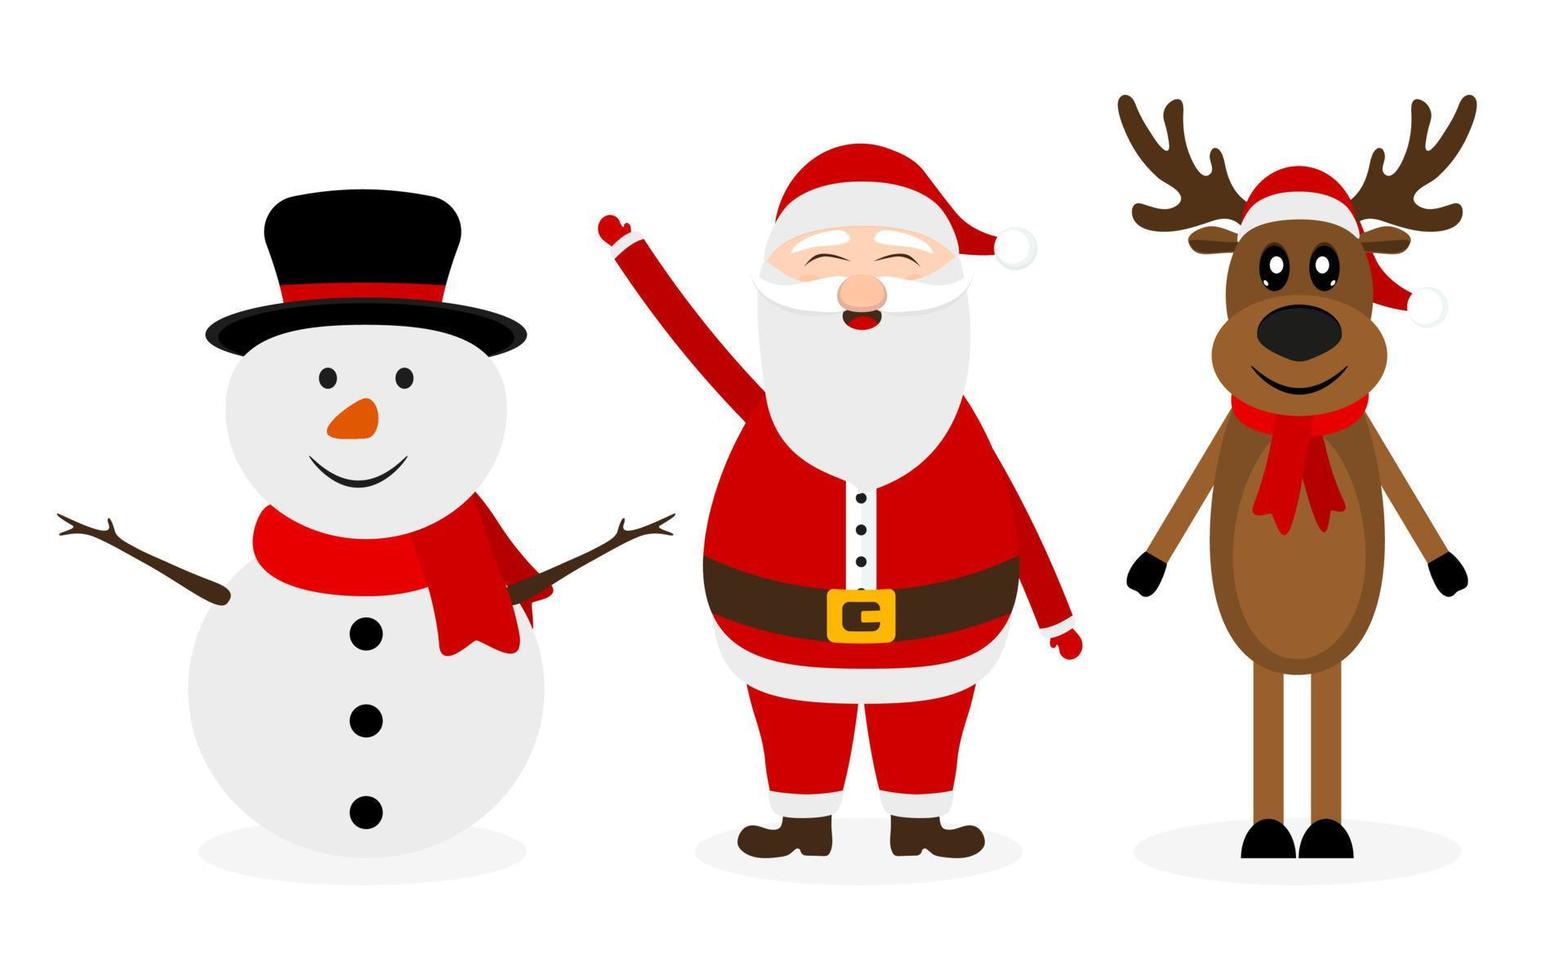 Santa Claus with reindeer and a snowman vector